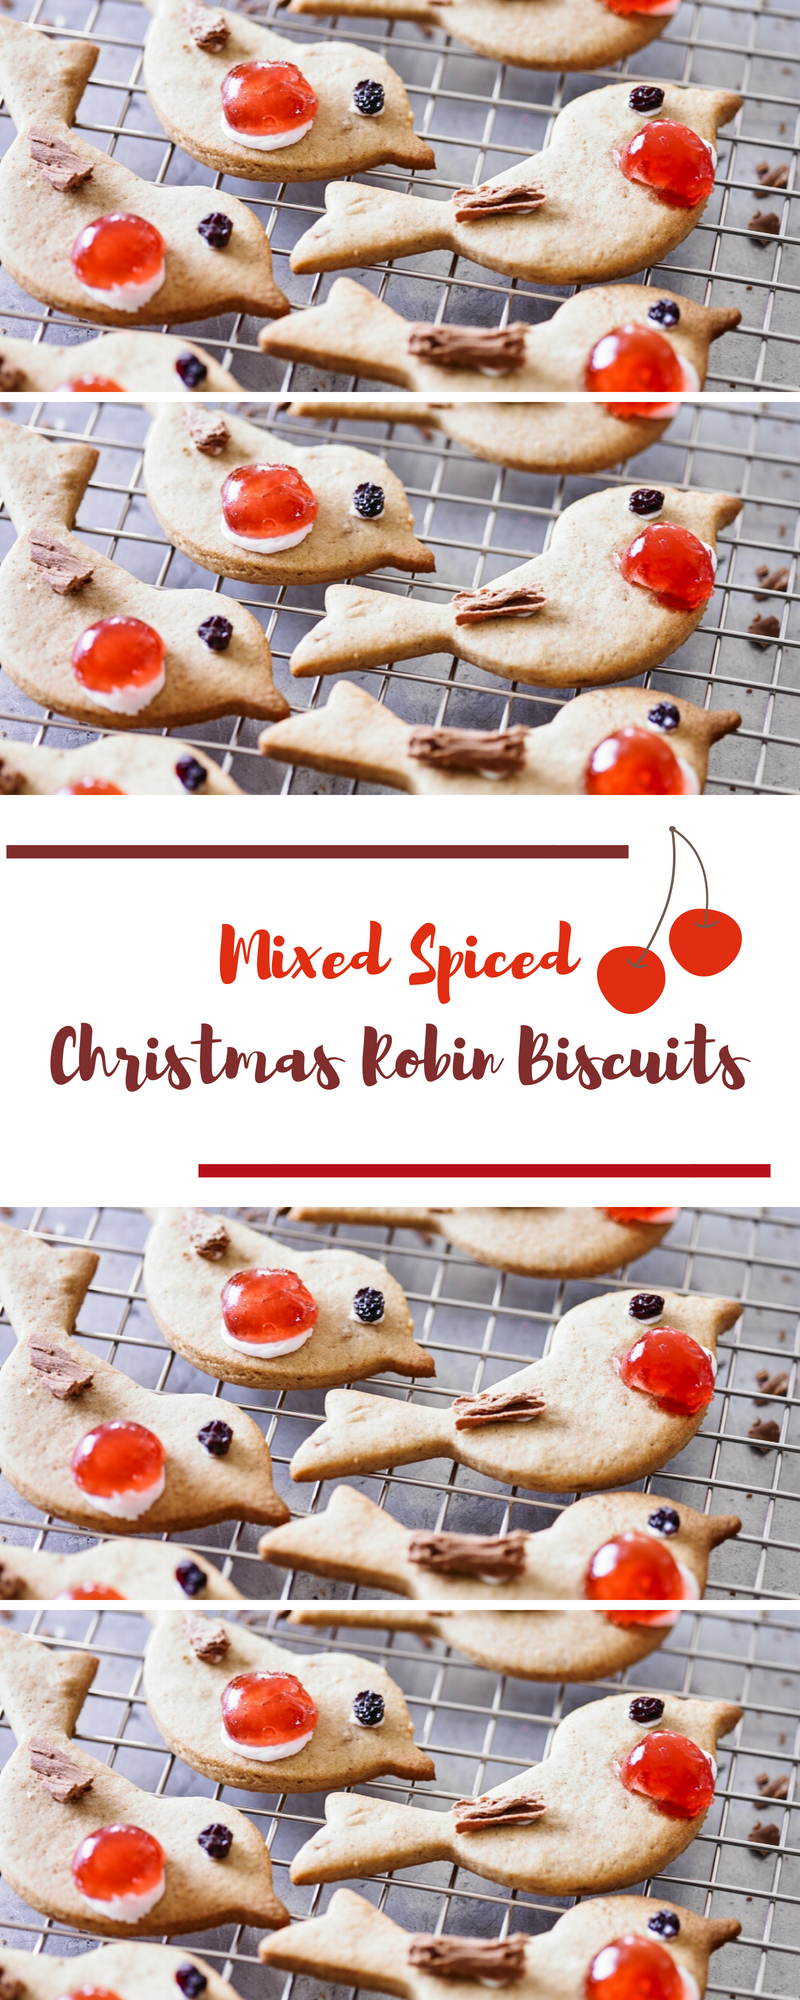 Mixed Spiced Christmas Robin Biscuits